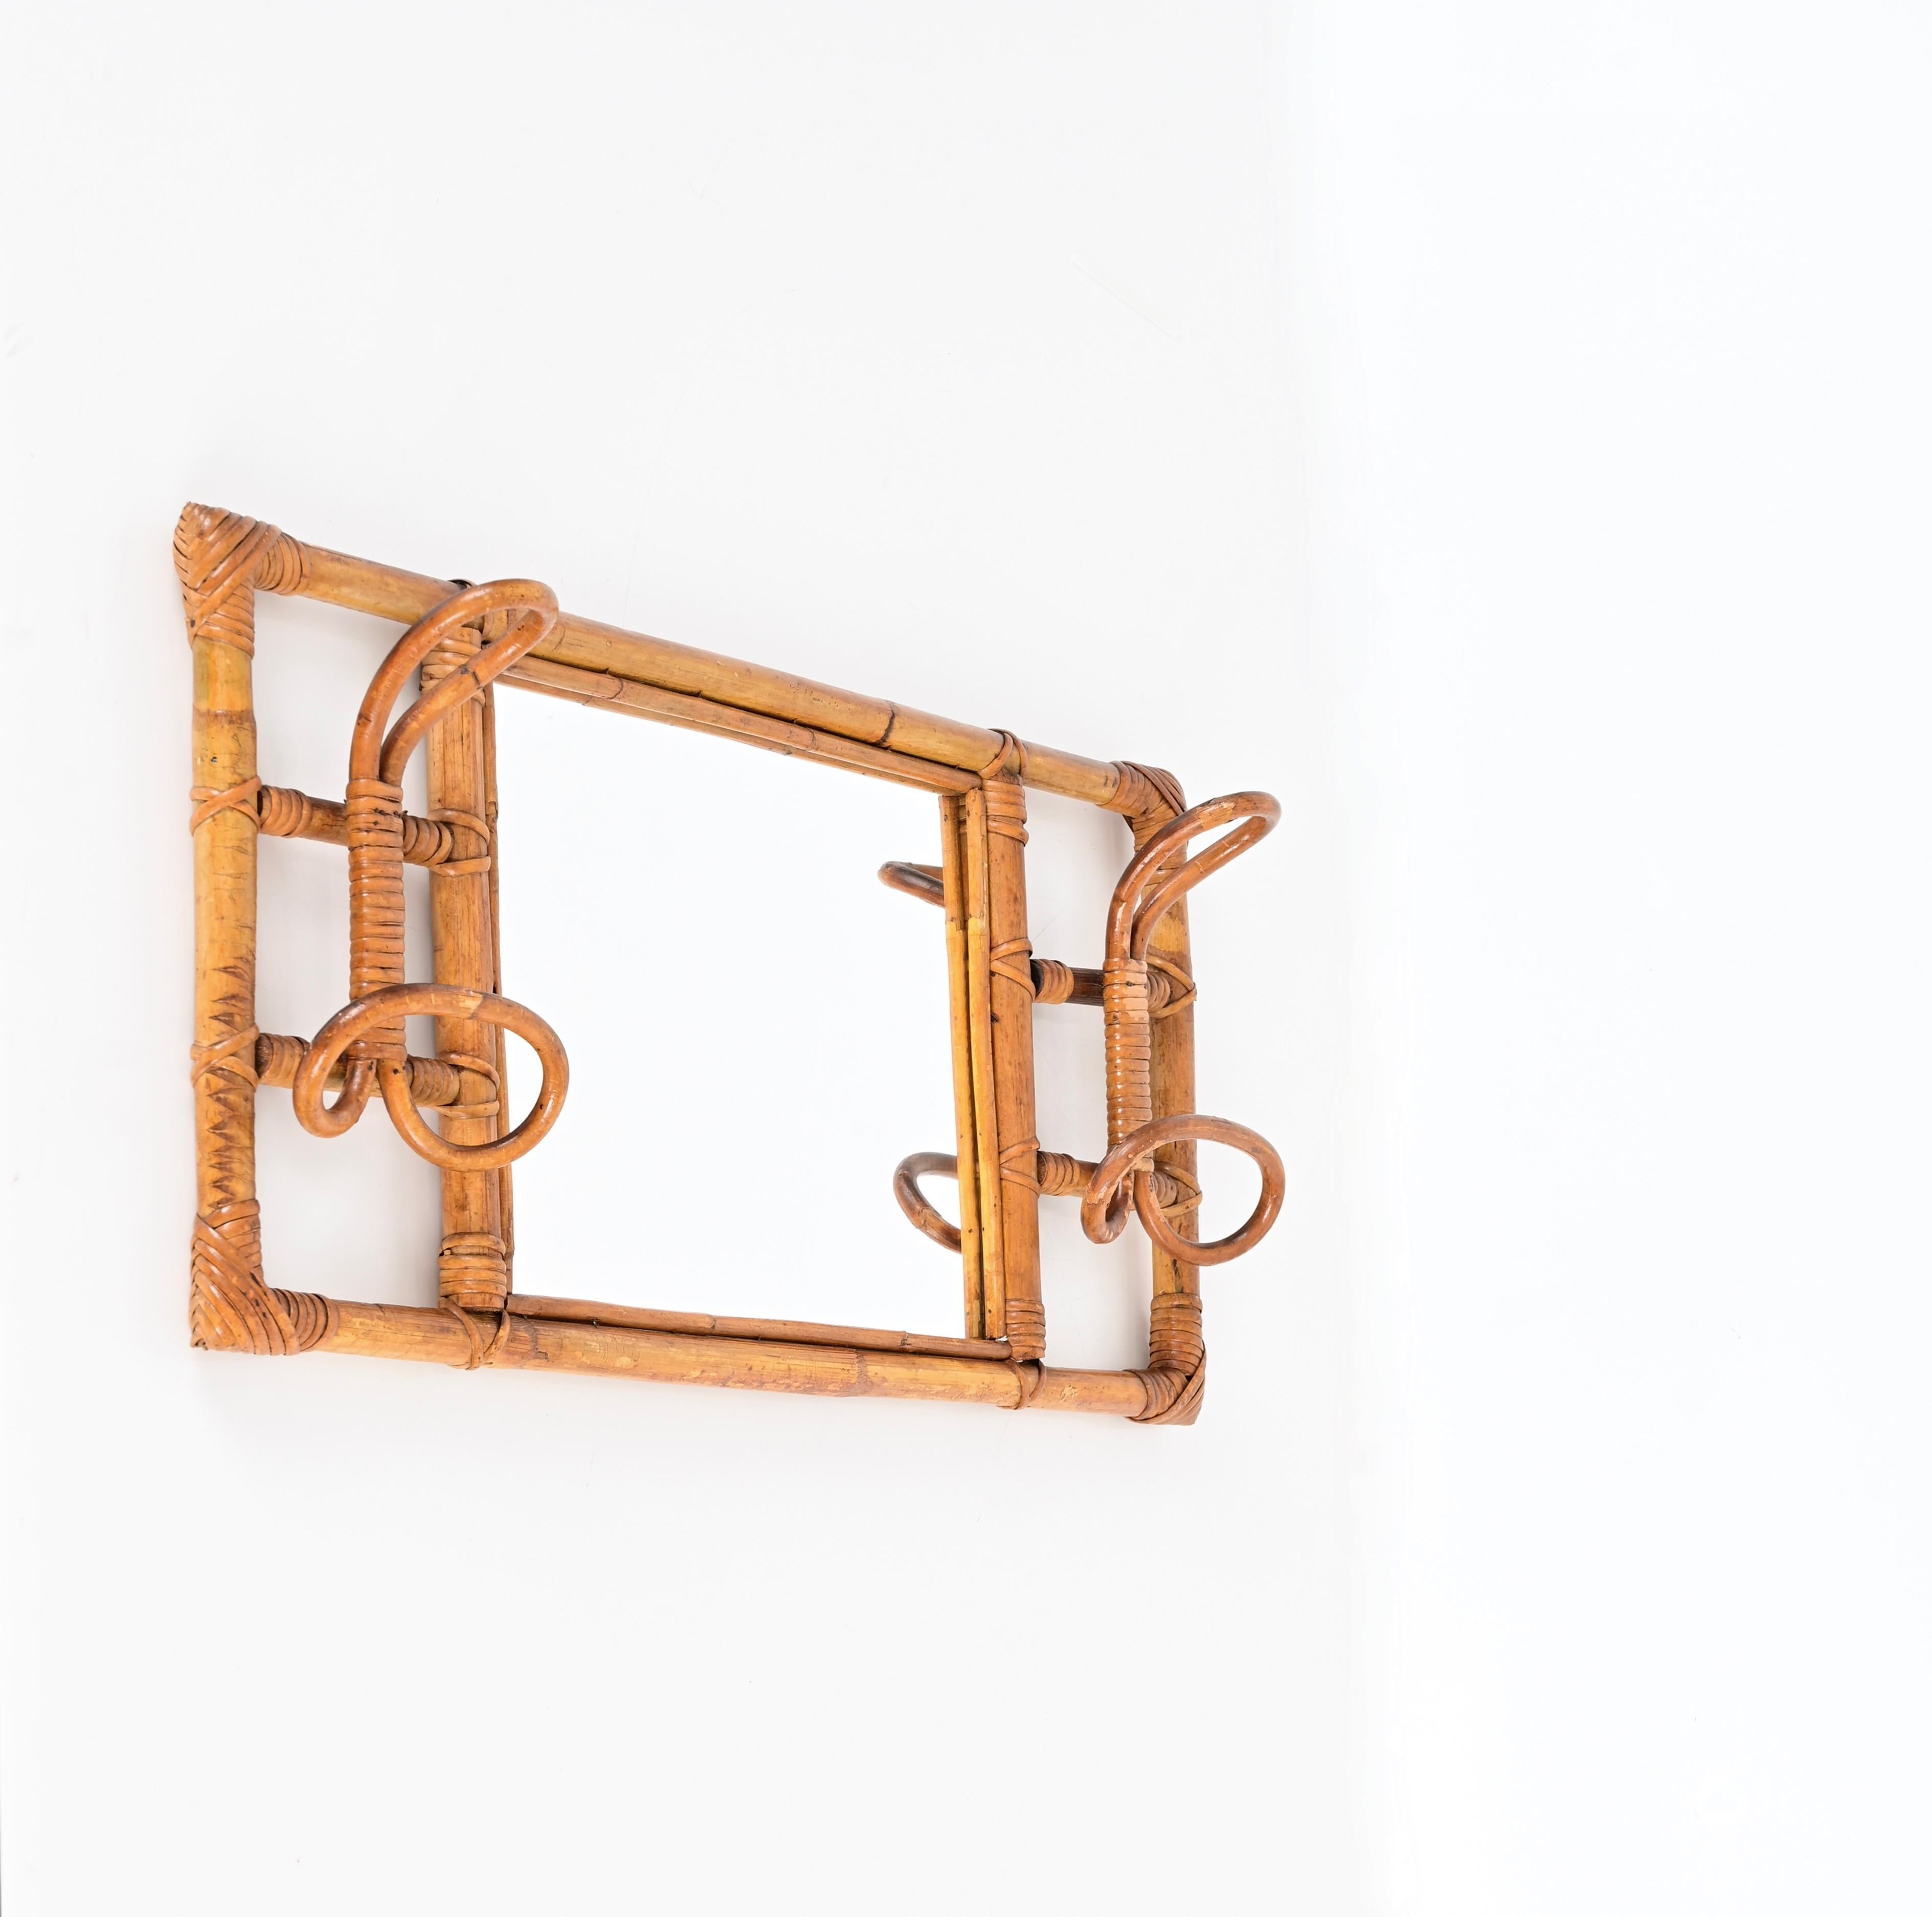 Mid-20th Century French Riviera Rectangular Mirror with Coat Hooks in Rattan, Wicker, Italy 1960s